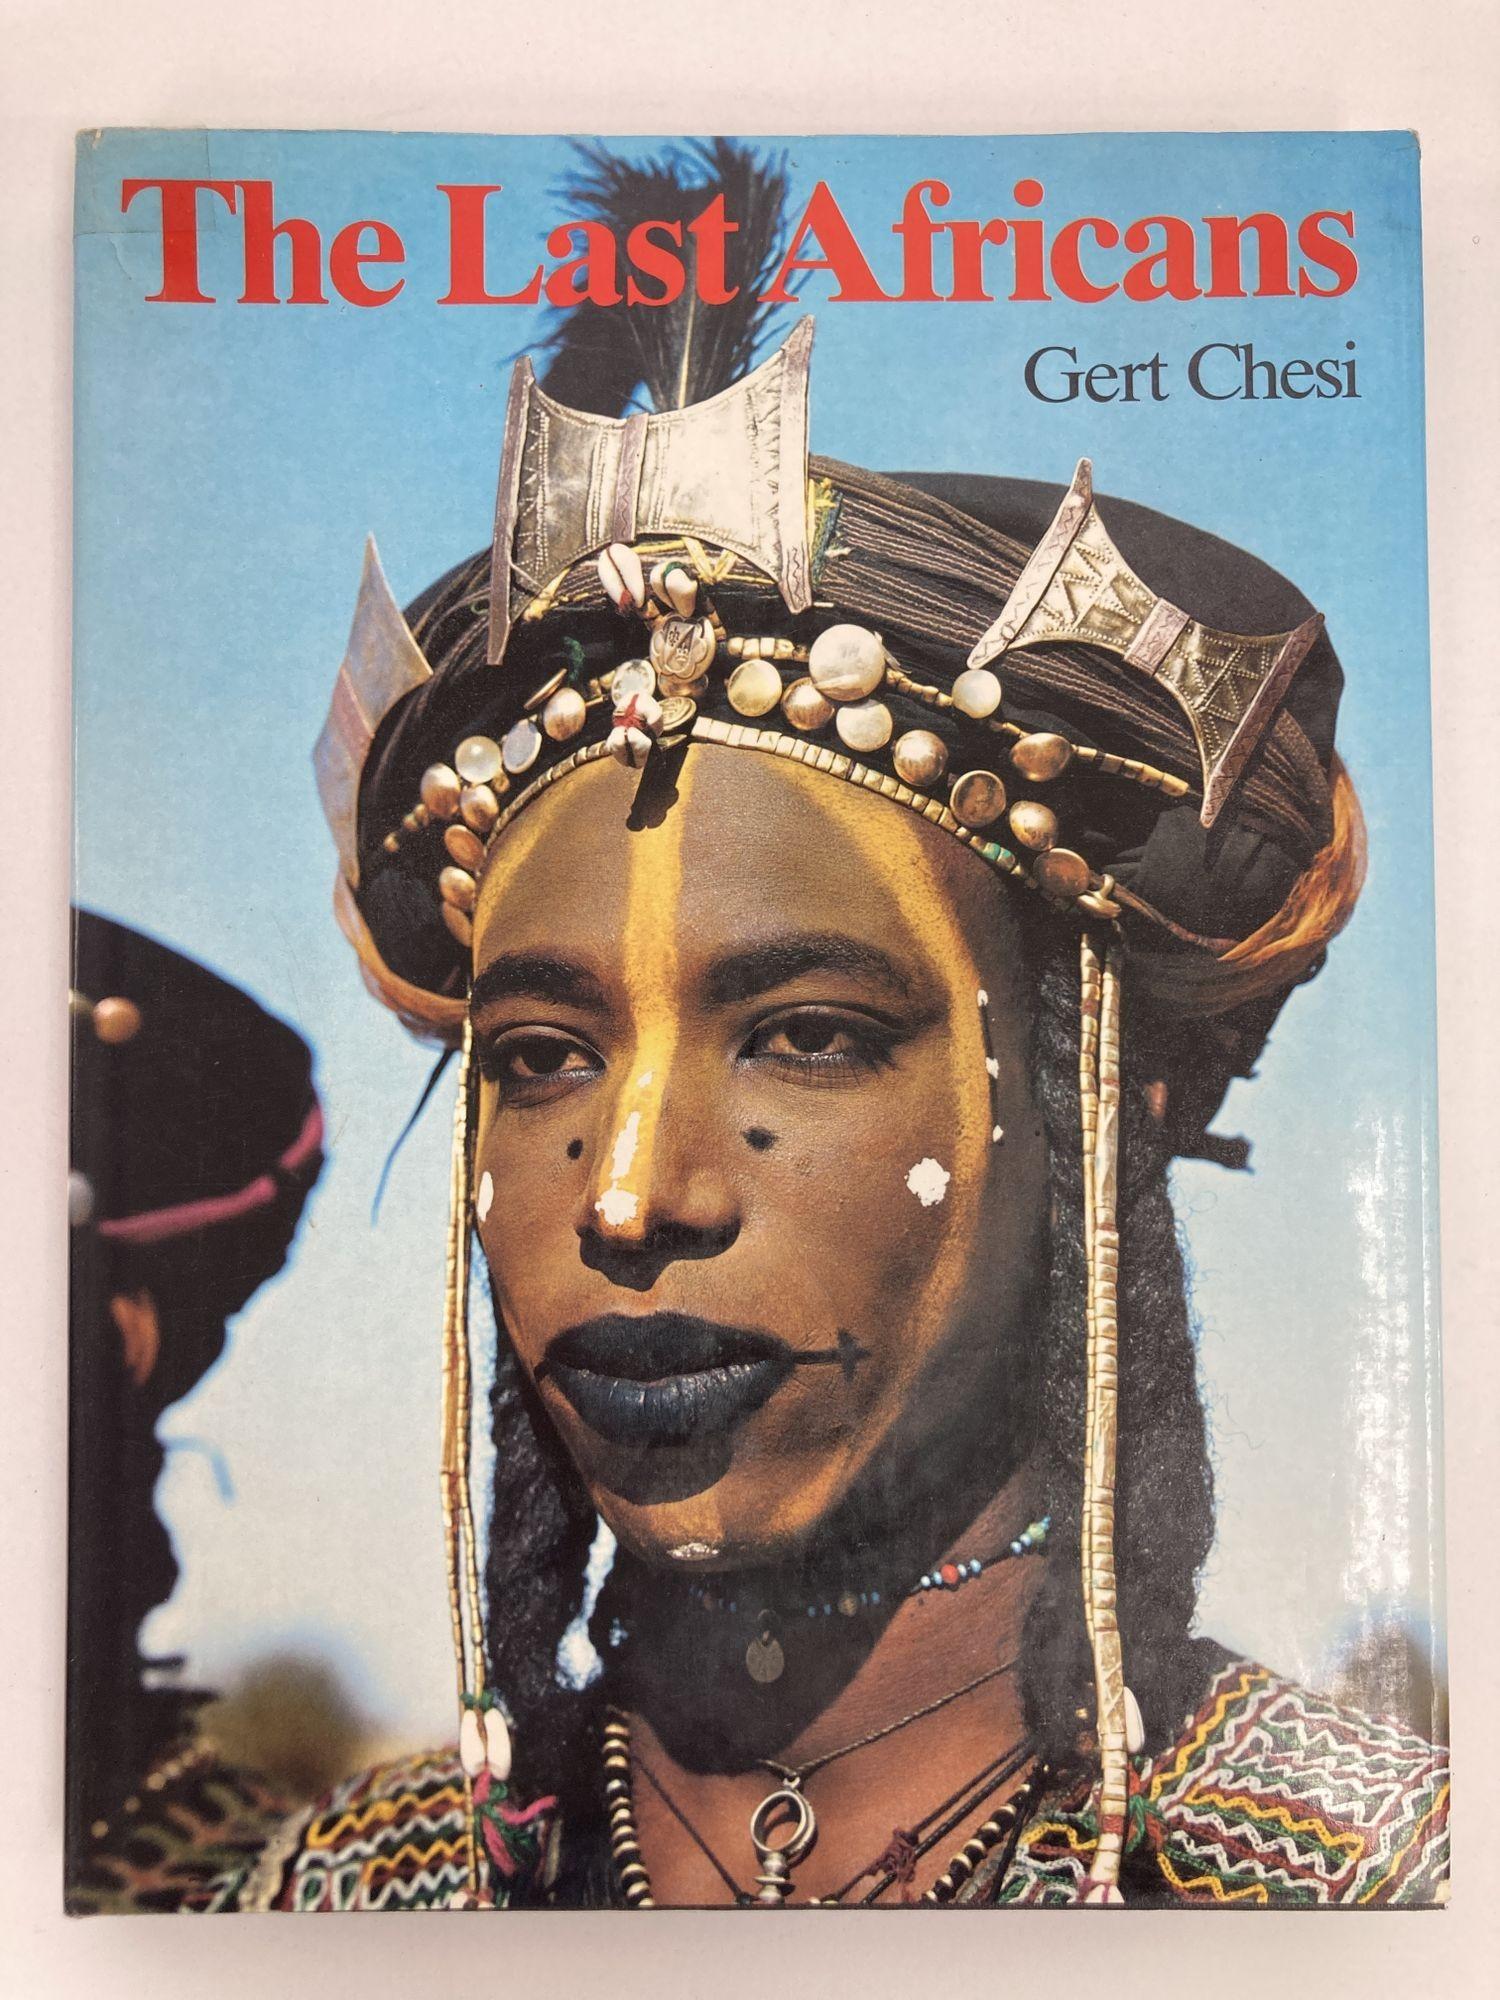 The Last Africans Gert Chesi Perlinger Hardcover Book 1981
Published by Perlinger-Verlag, Worgl Austria, 1981
Copiously illustrated in color and black and white. A nice copy in little soiled and torn dj. The author has focused on ethnic groups that,